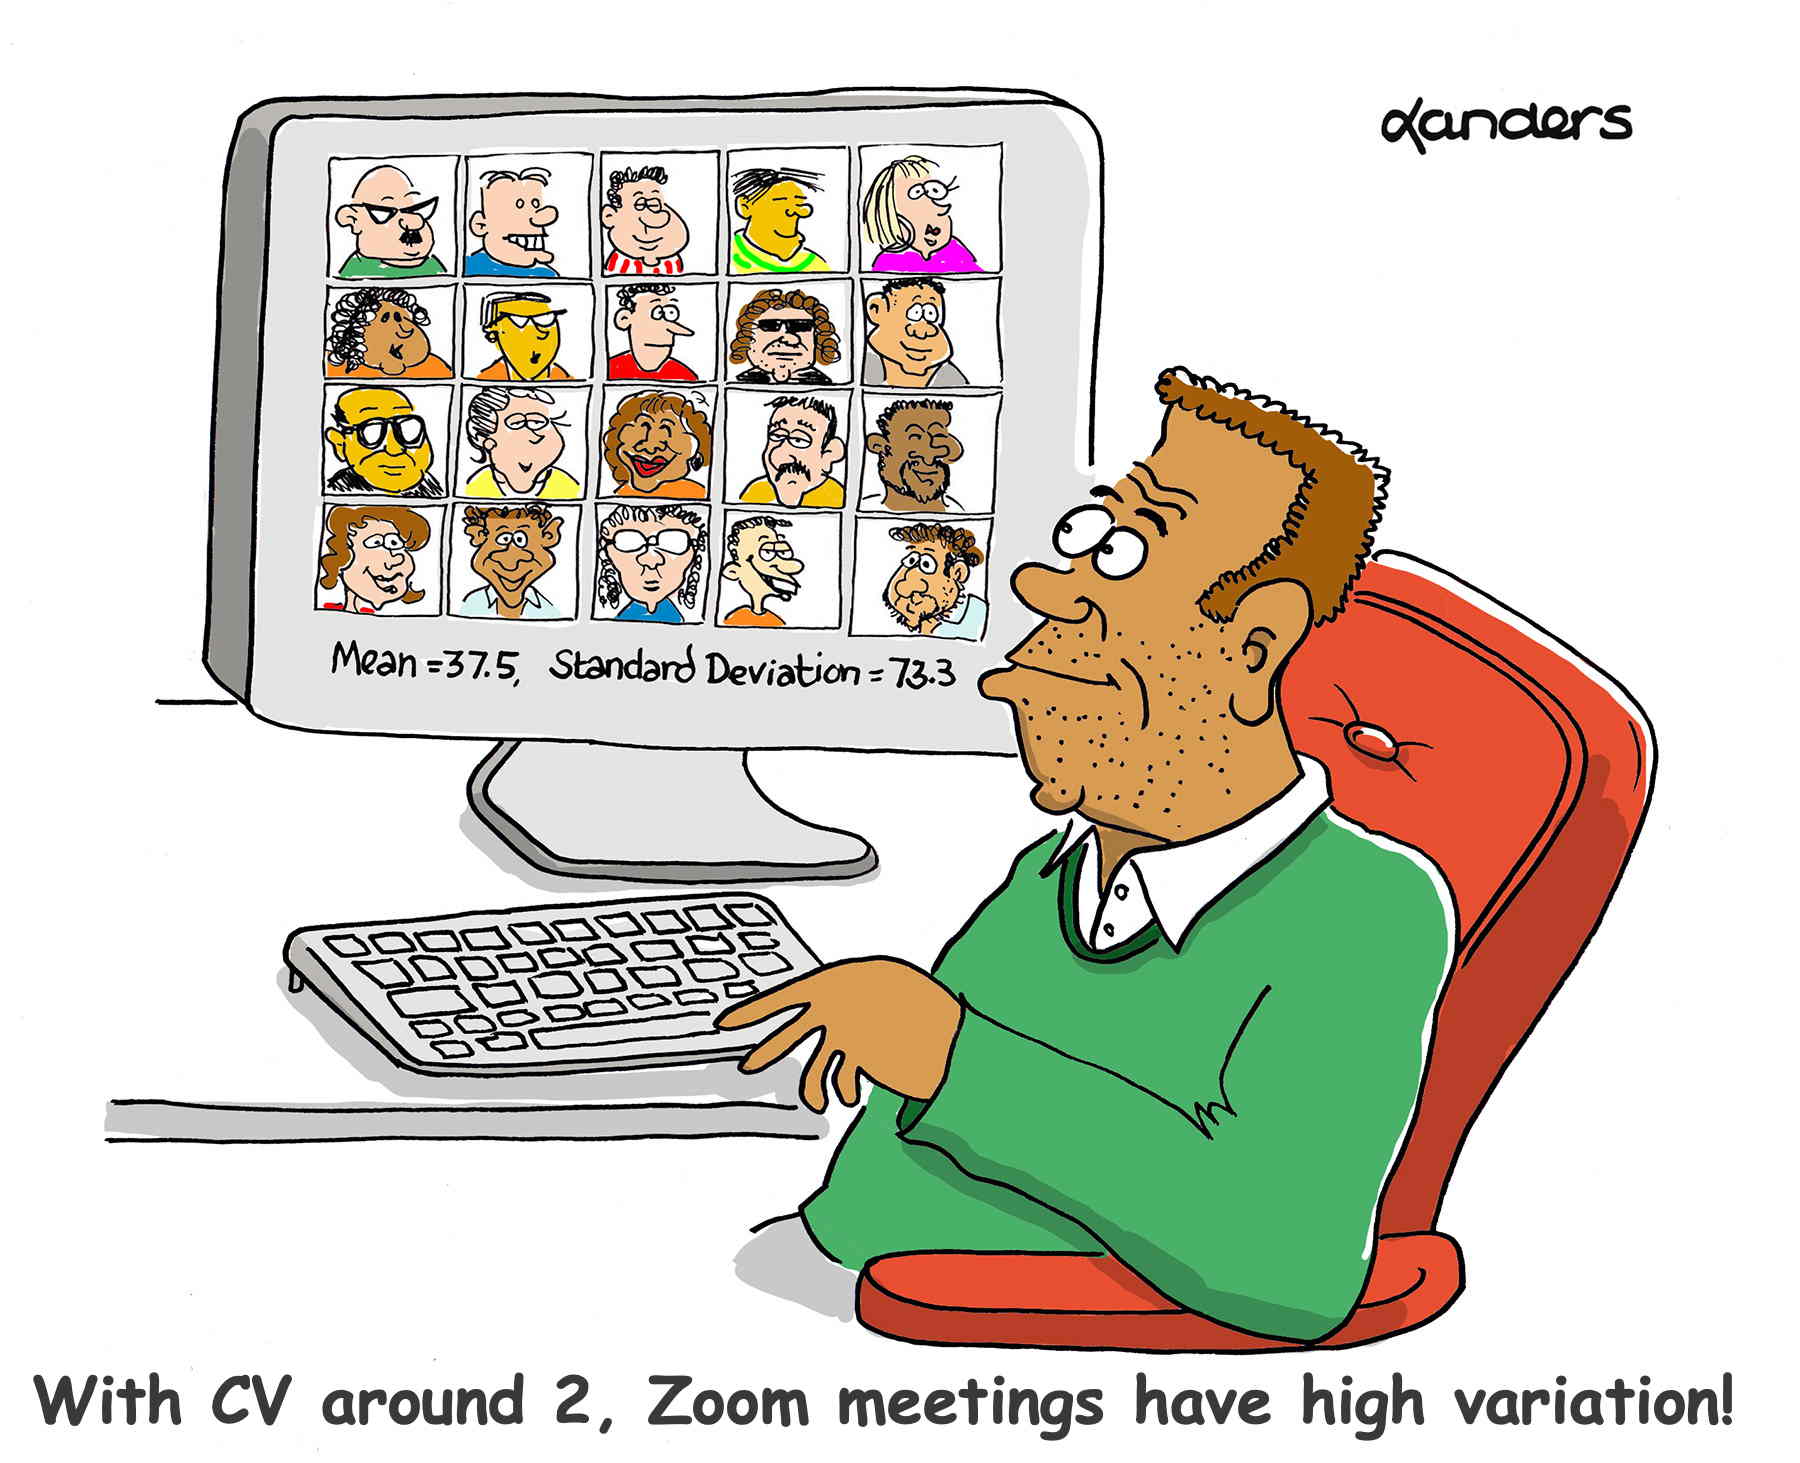 cartoon showing man at zoom meeting, under all the pictures of people it says mean = 37.5, standard deviation = 73.3. Caption says:"With CV around 2, Zoom meetings have high variation!"